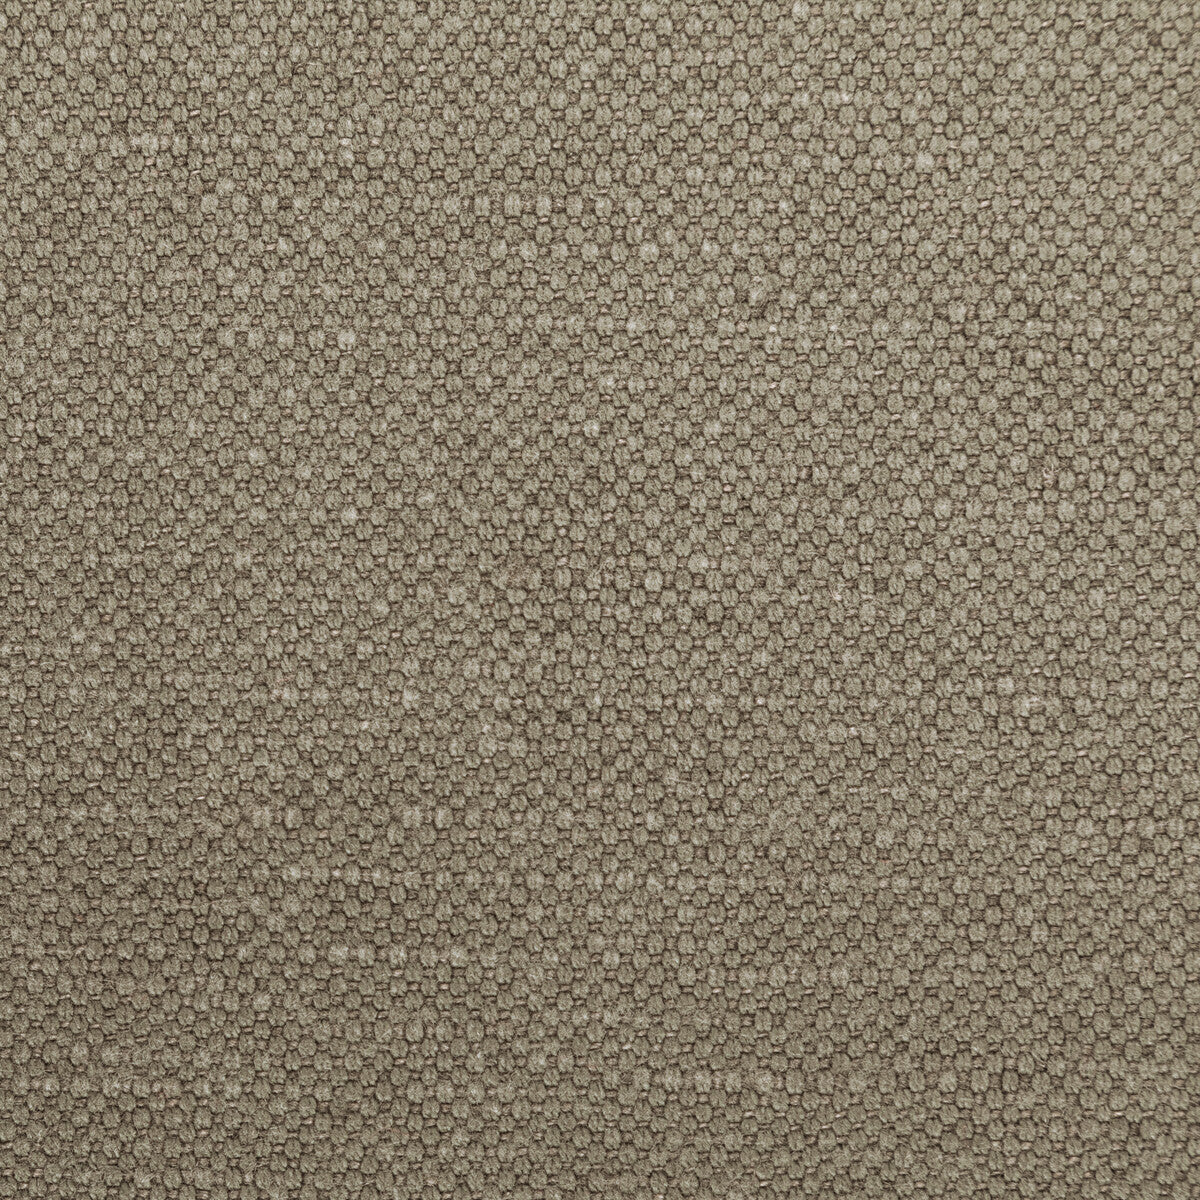 Carson fabric in steam color - pattern 36282.1621.0 - by Kravet Basics